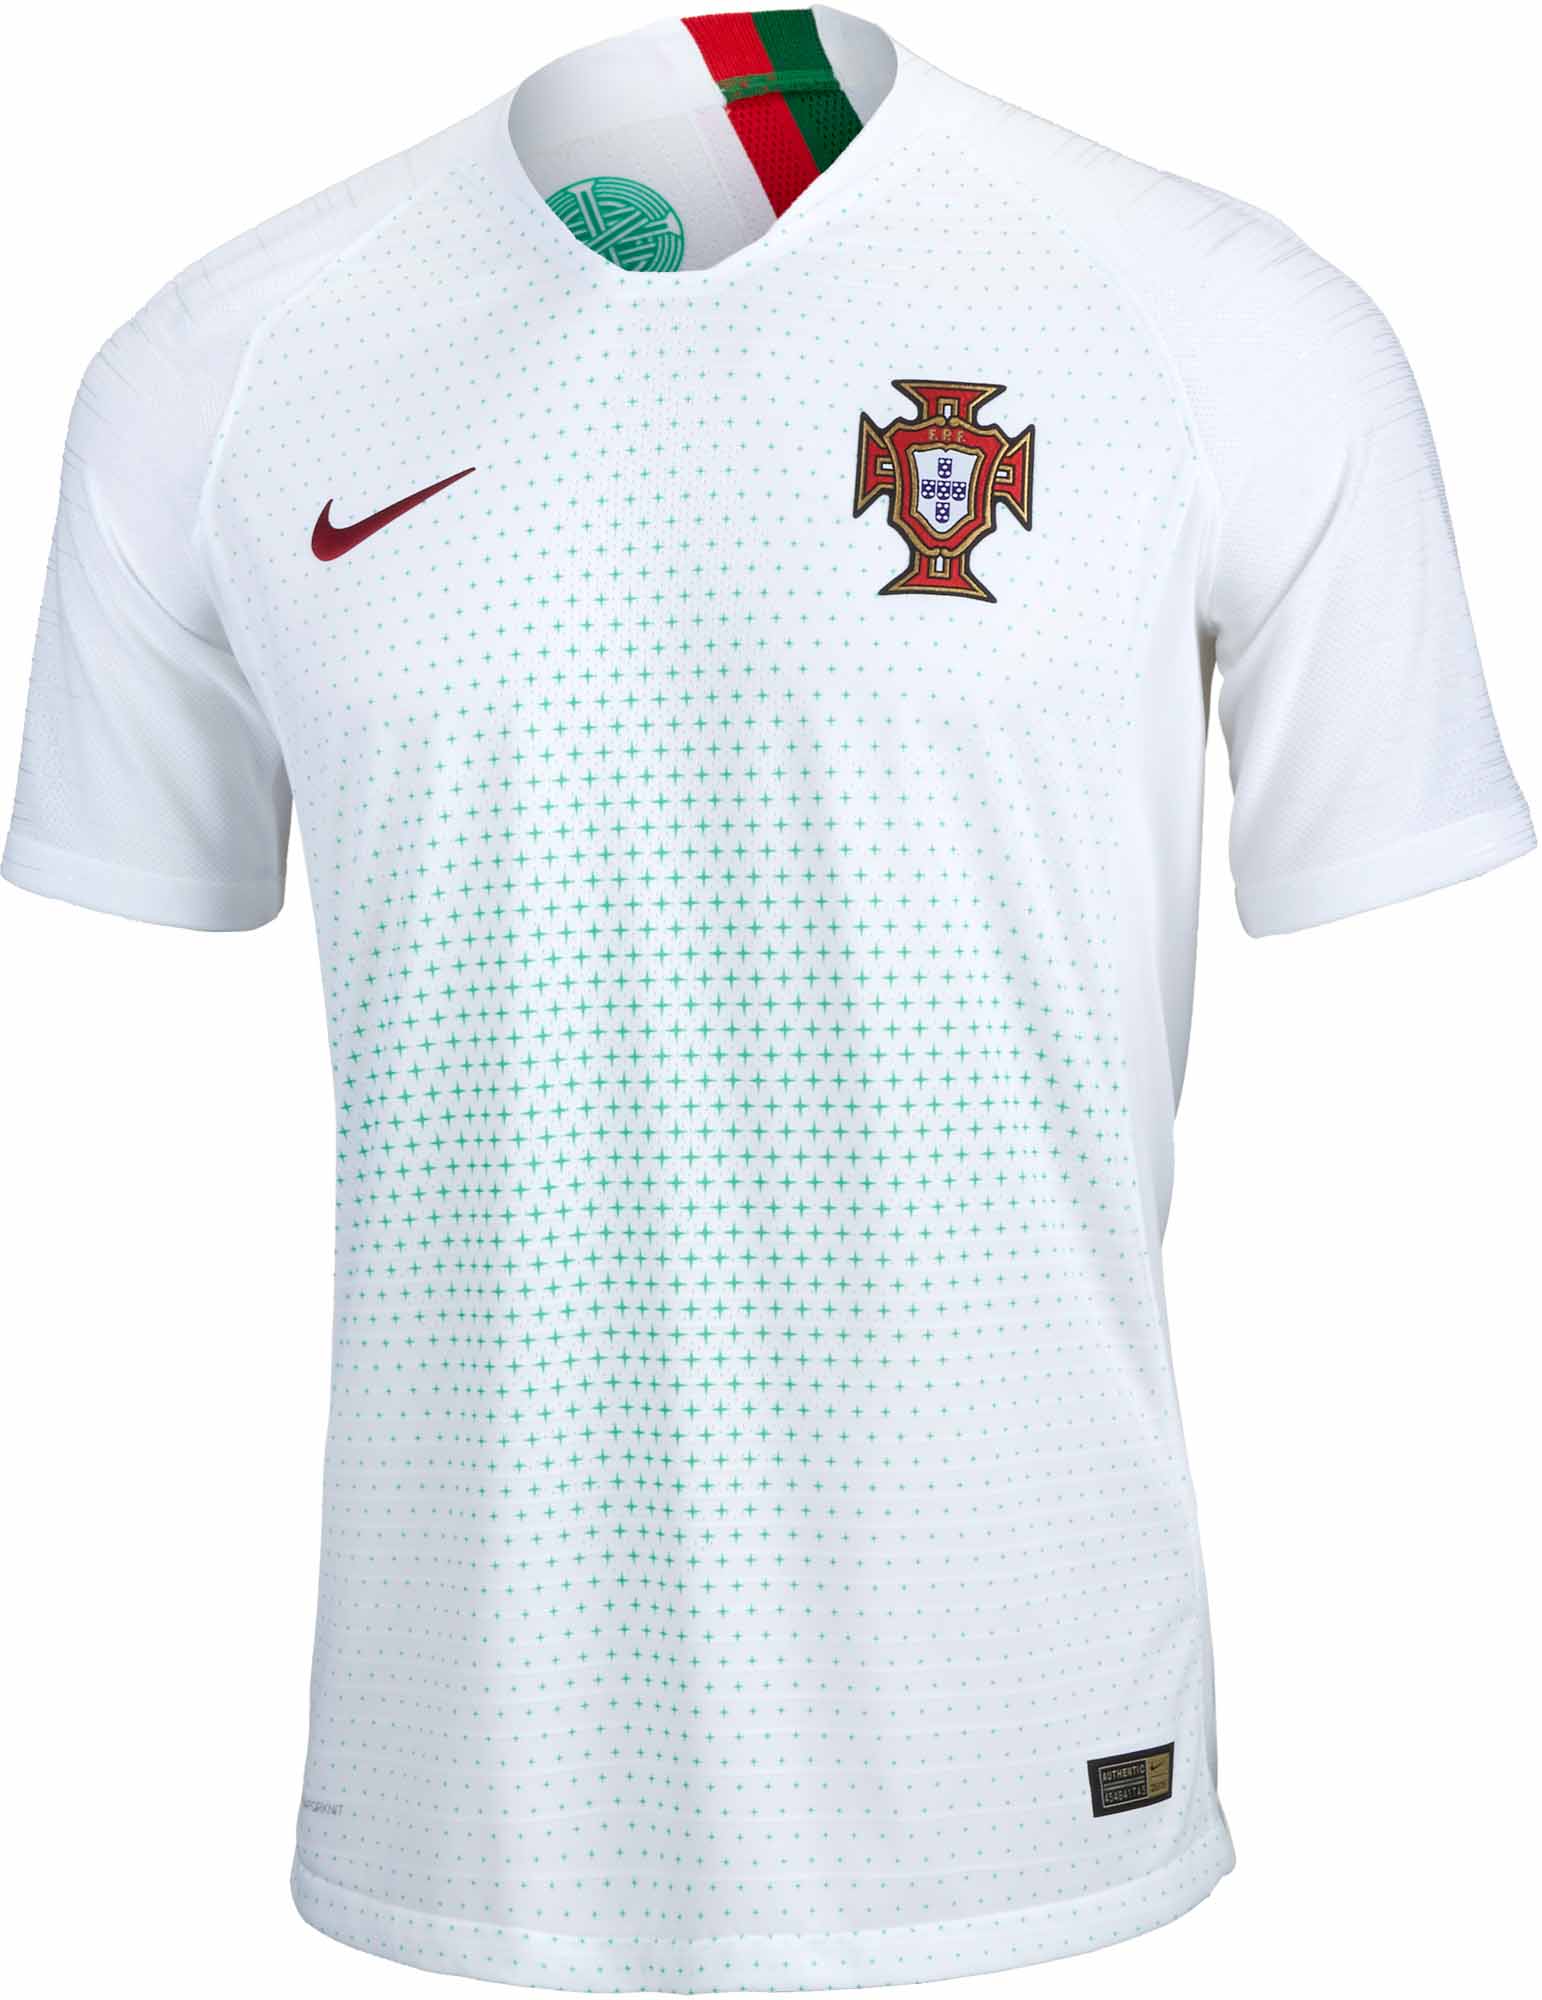 Nike Portugal Away Match Jersey 2018-19 (NS) - Soccer Master